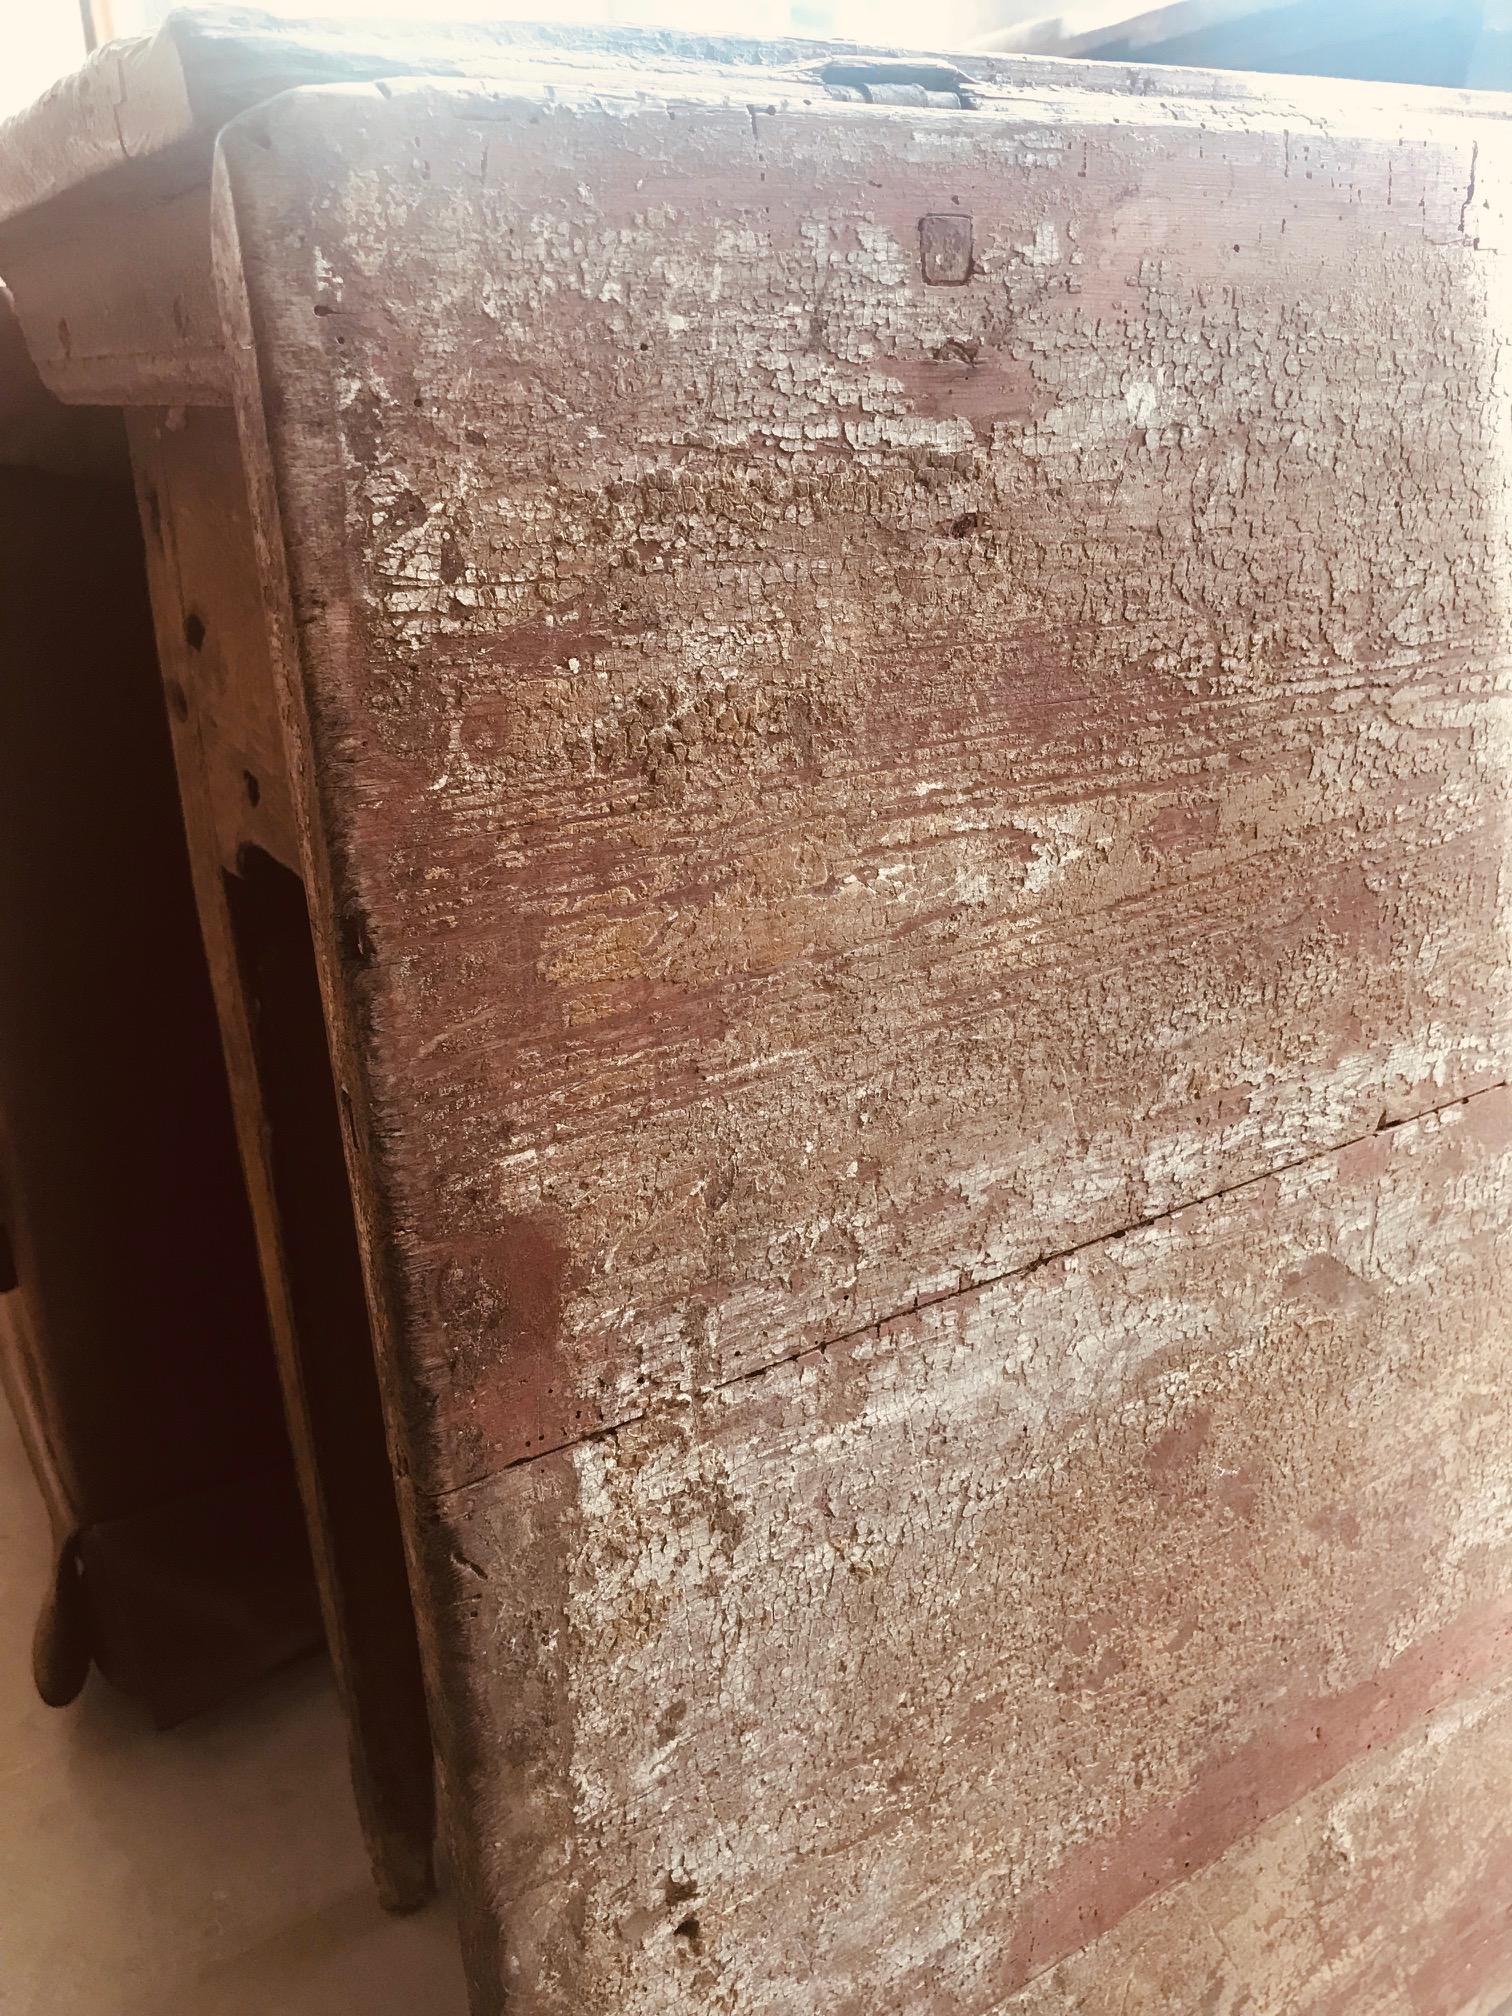 This distressed table has amazing patina, and would look lovely as a side table. One leaf is missing so best recommended as a decorative item rather than for everyday use.